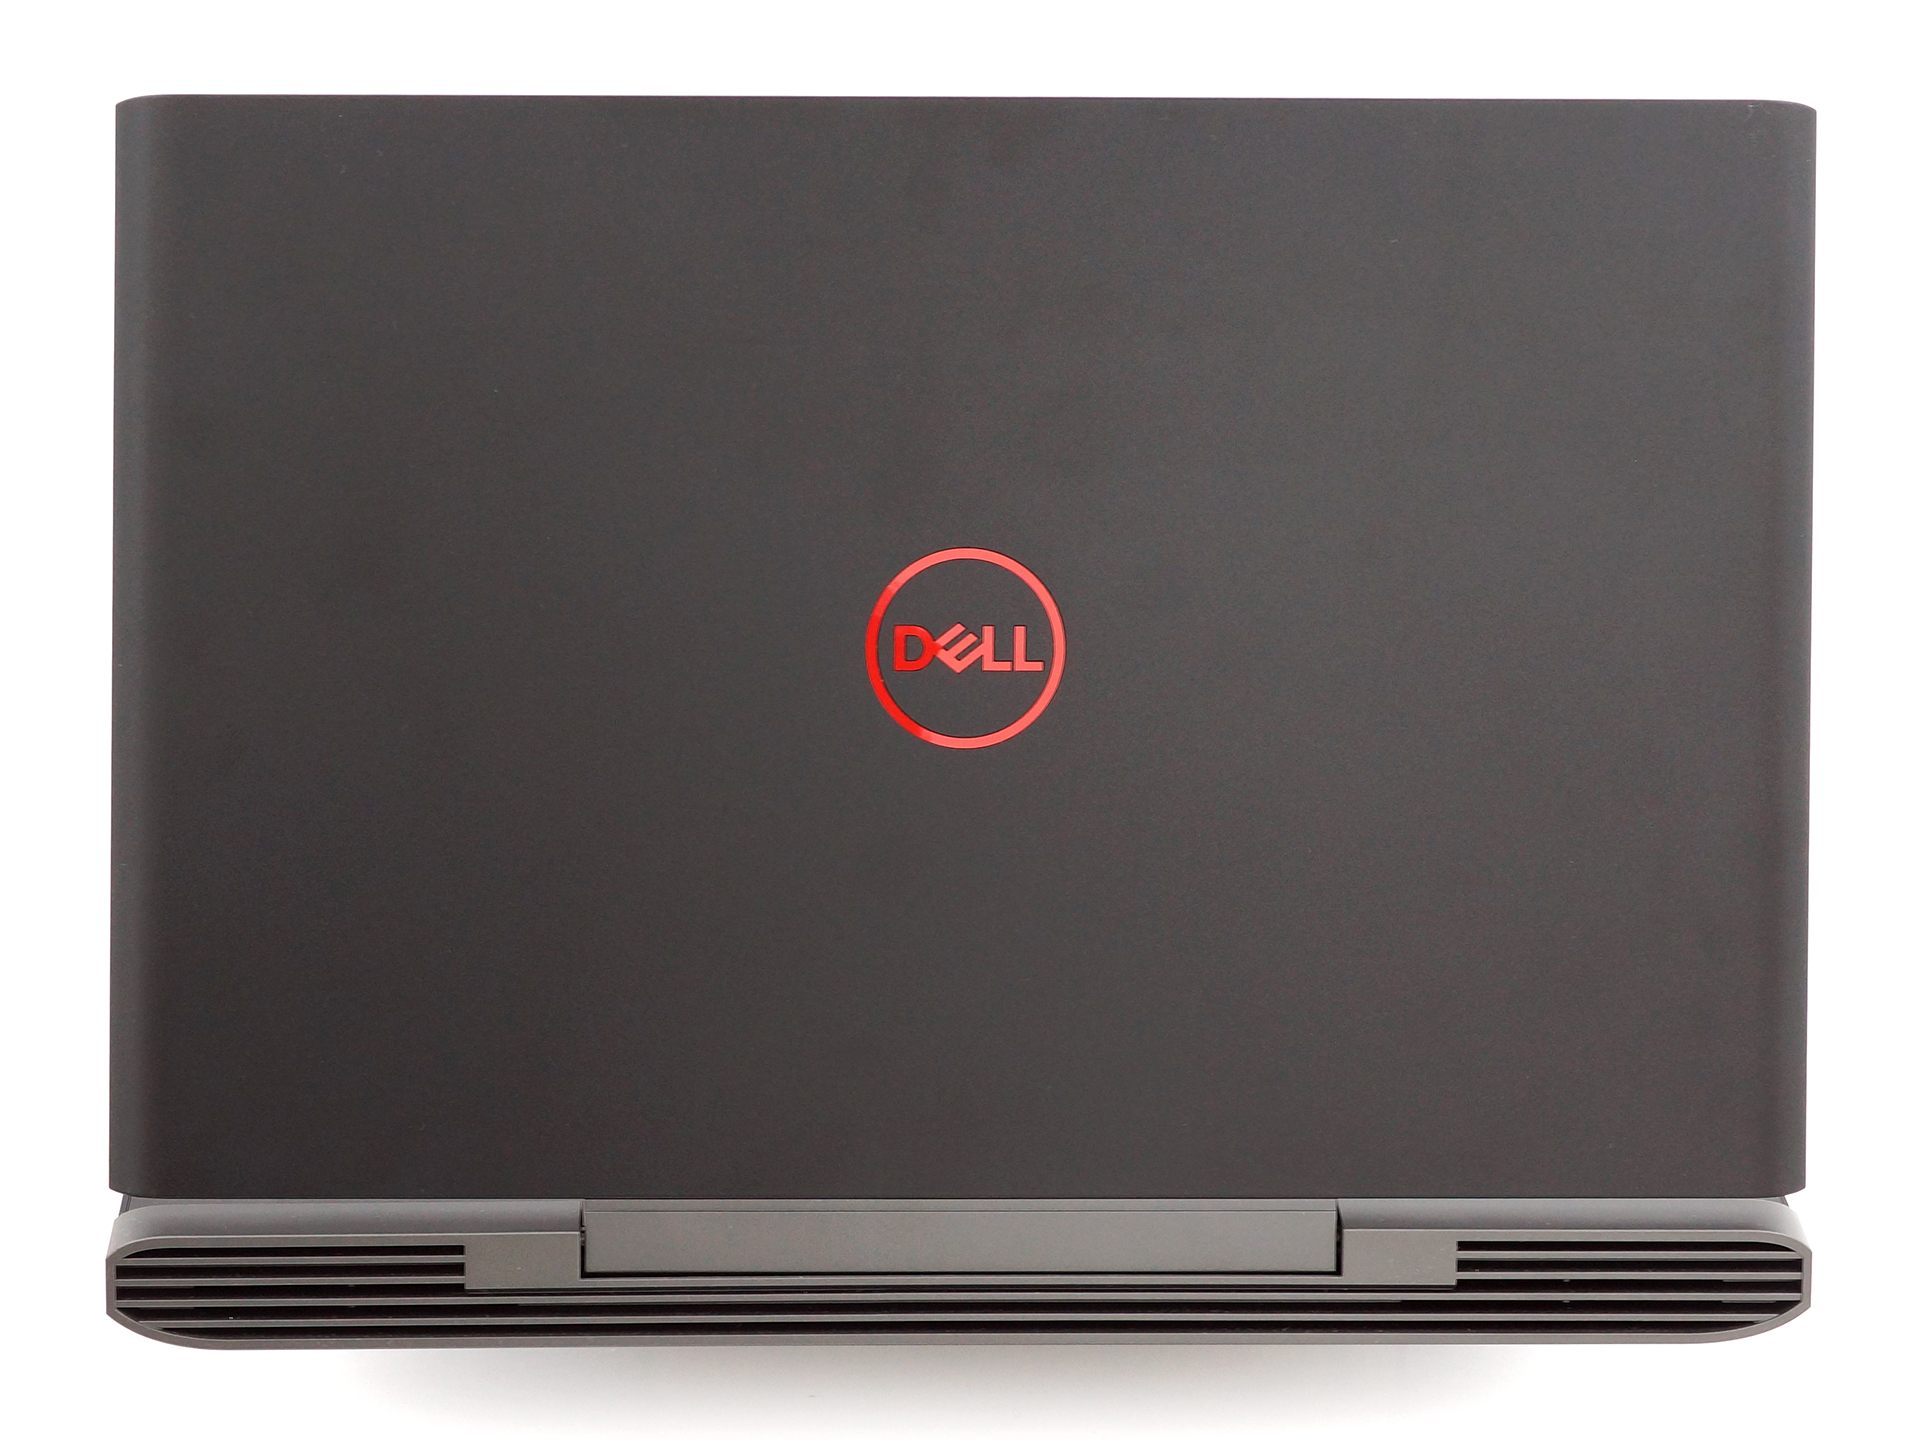 Dell Inspiron 15 7577 (GTX 1060 Max-Q) review - improved but still